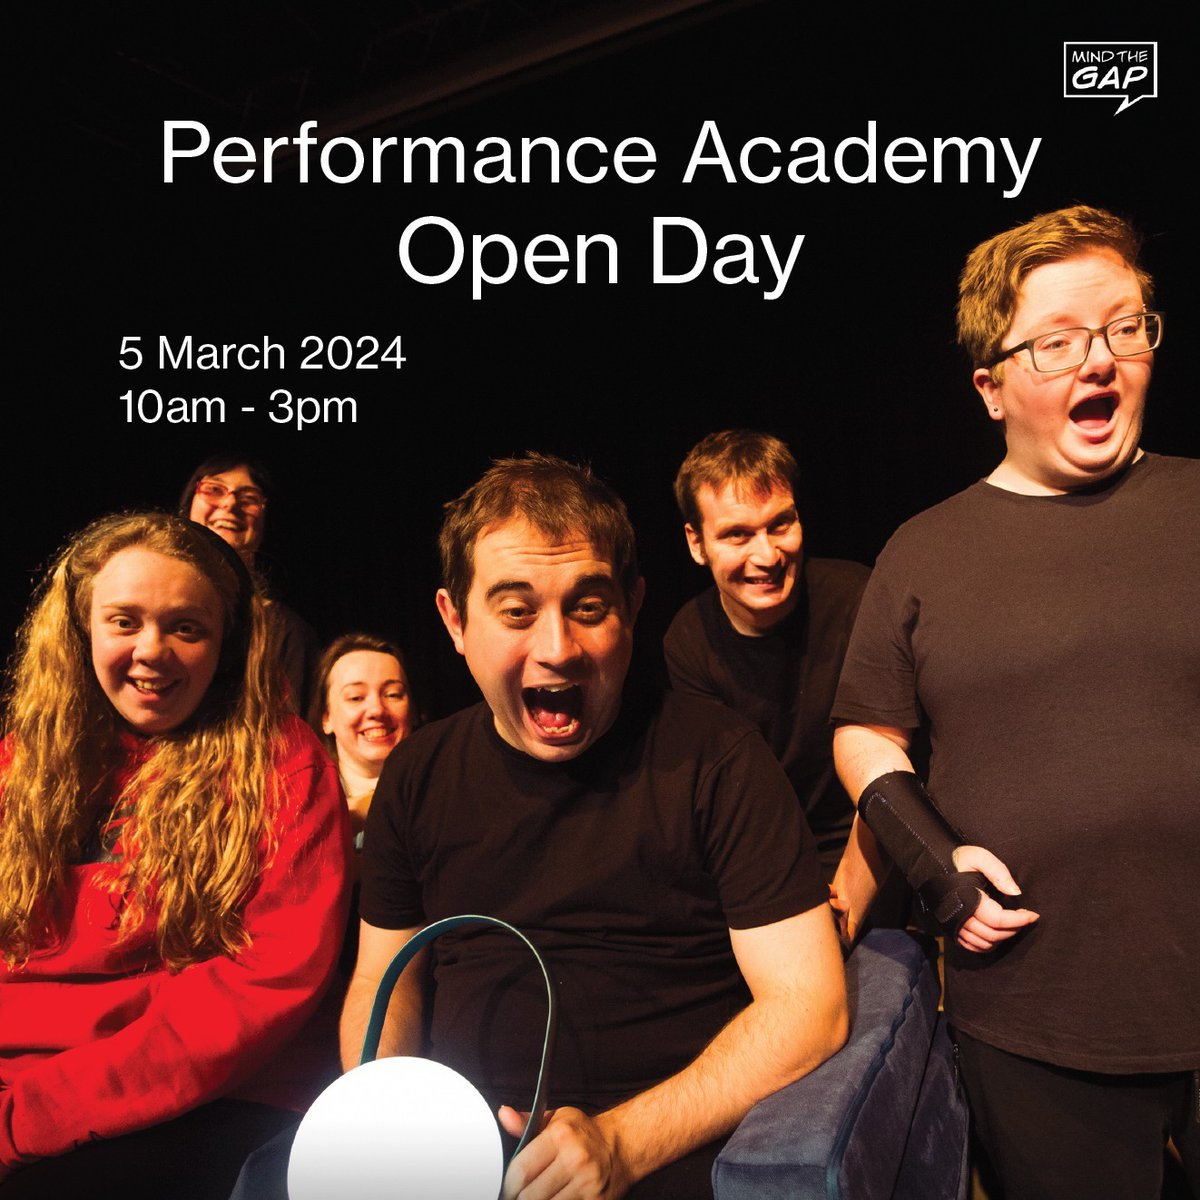 It's only 1 week till our Performance Academy Open Day and 2 weeks till our One Day Courses Open Day! If you are interested in what happens inside our wonderful building, don't miss the opportunity to learn more. Book your place by emailing academy@mind-the-gap.org.uk